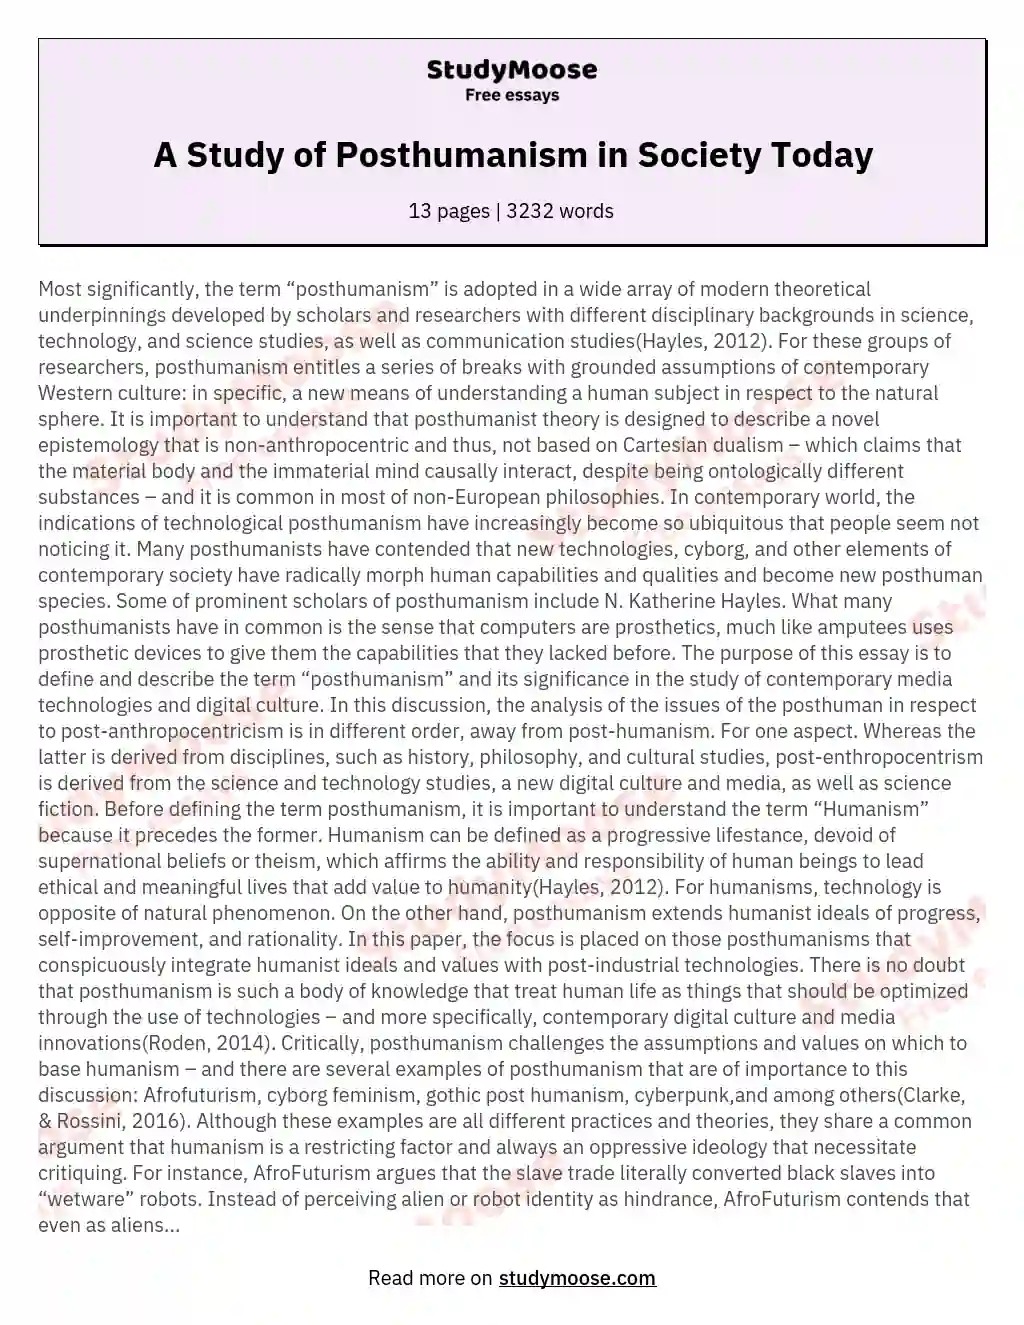 A Study of Posthumanism in Society Today essay